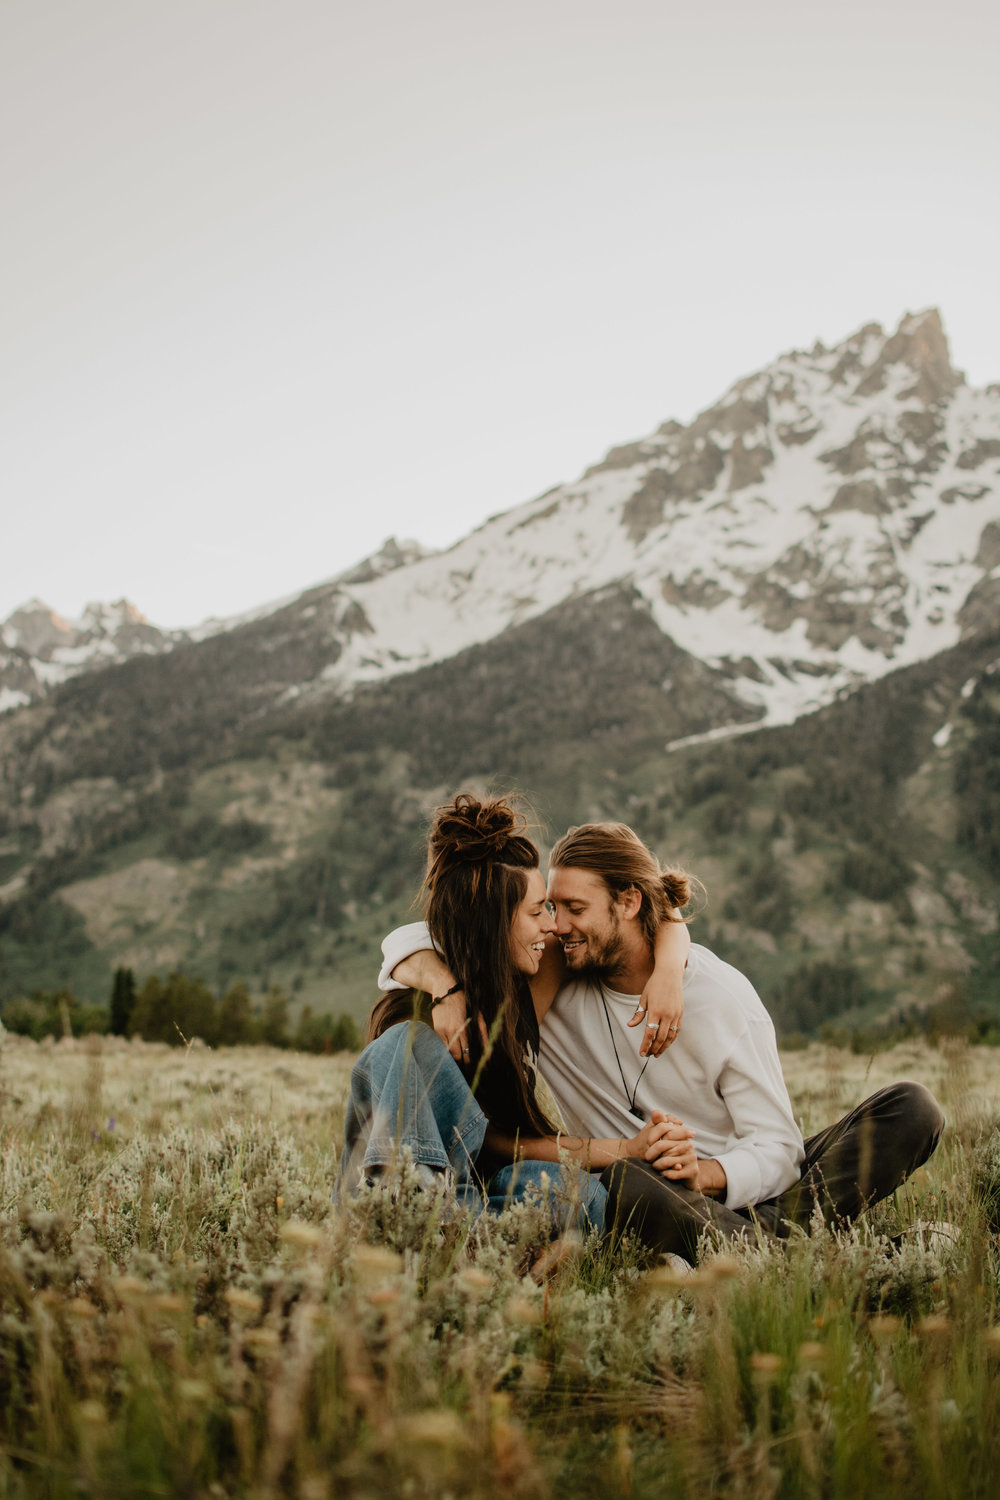 Jocilyn Bennett Photography | Engagement Pose Ideas | Destination Wedding Photographer | Elopement Wedding Photographer | National Park Elopement Photography | Capturing raw and genuine emotion | Wyoming photographer | Wyoming wedding photographer | National Park Weddings | Outfit ideas for engagements | Mountain engagements | Adventure Photographer | Movement photography | Bohemian photography | Bohemian wedding | Jackson Hole Photography | Grand Teton National Park | Couple sitting in the meadow |